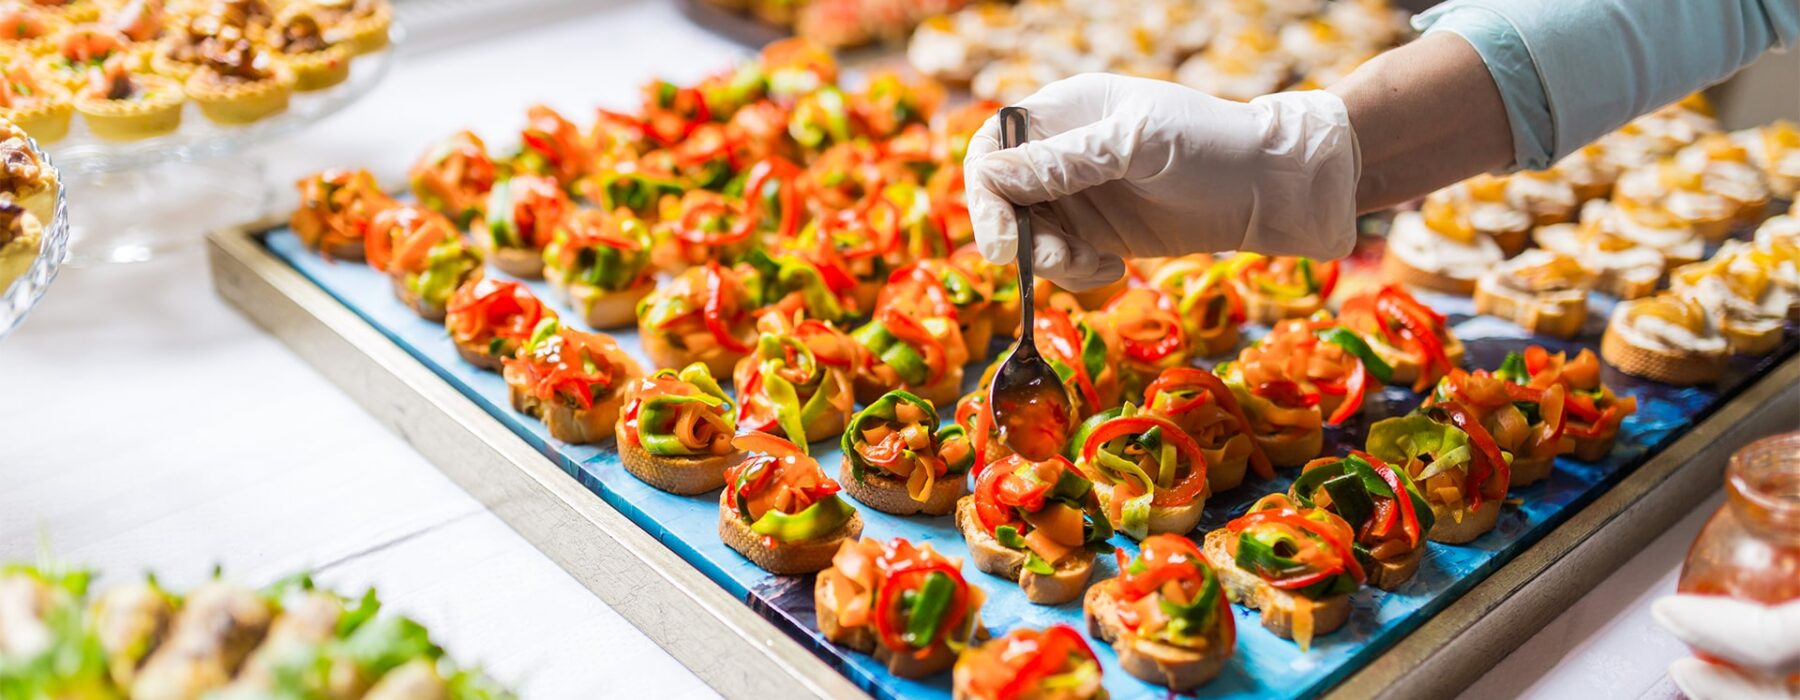 Customizable Menus and Dietary Restrictions in Private Party Catering